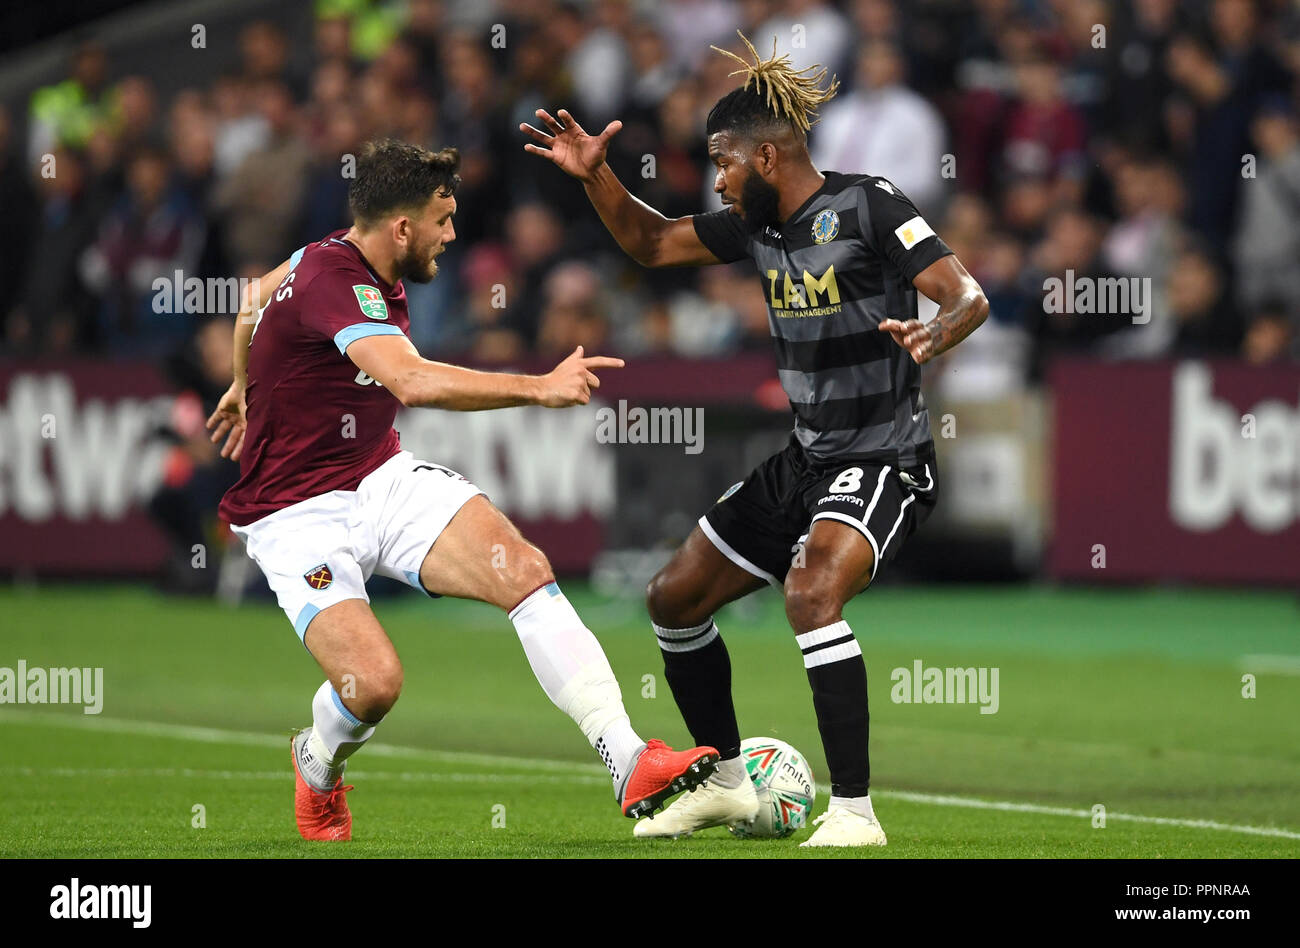 West Ham United's Robert Snodgrass (left) and Macclesfield Town's Tyrone Marsh battle for the ball during the Carabao Cup, Third Round match at London Stadium. Stock Photo